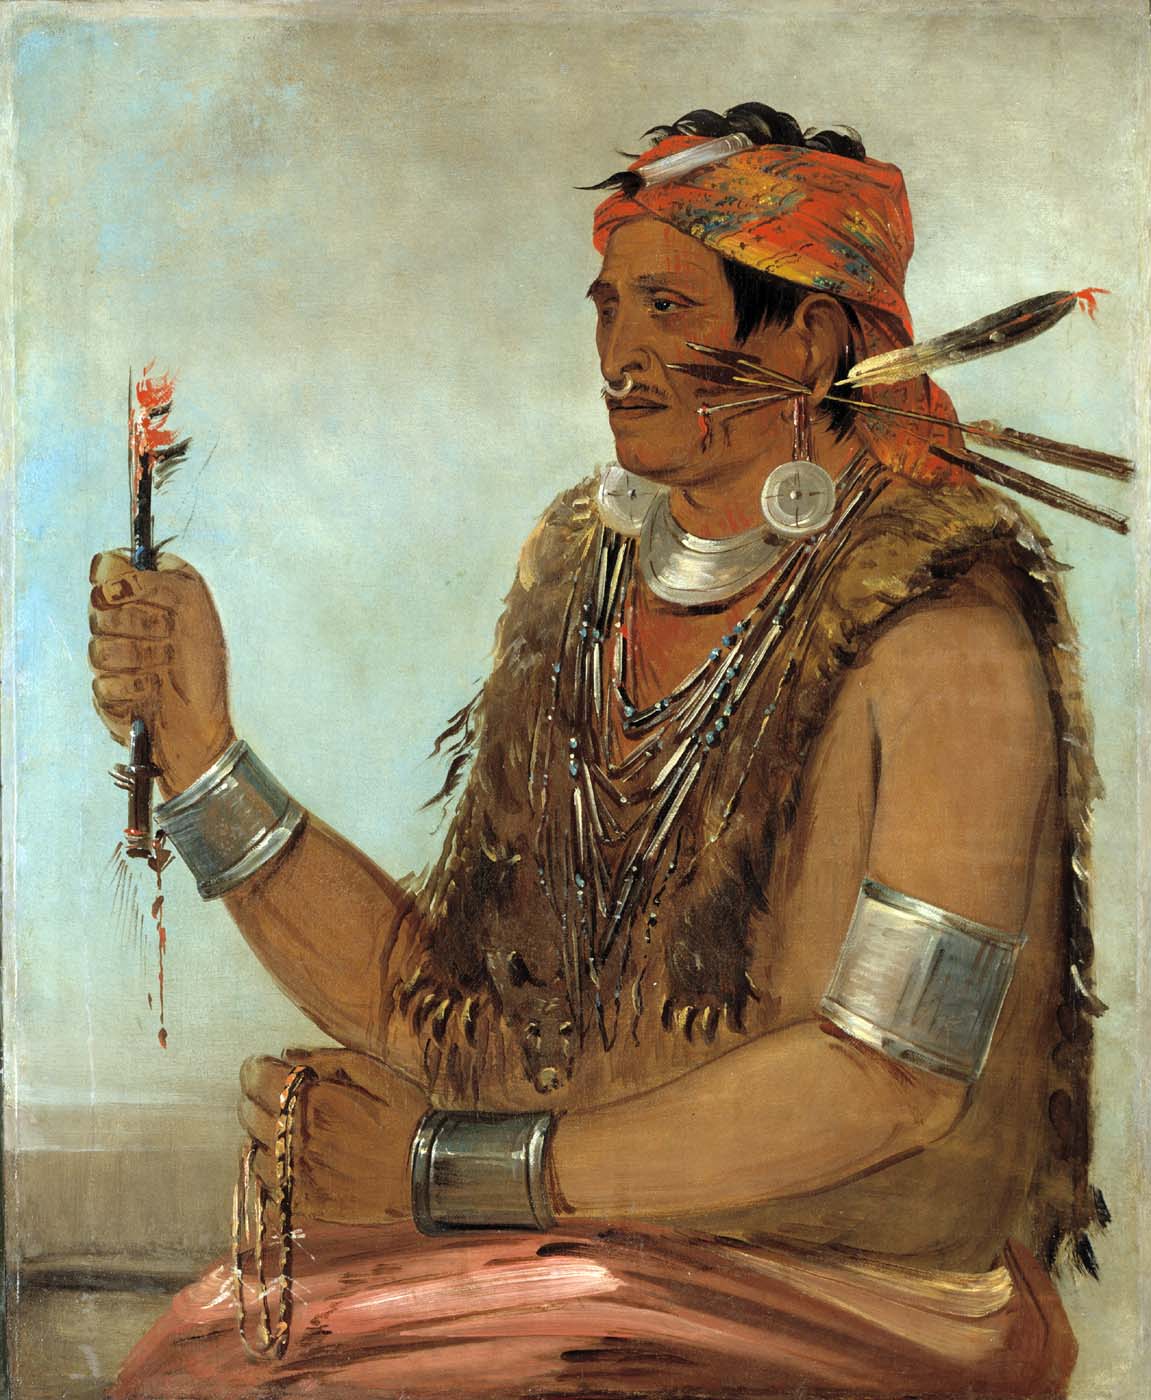 Tecumseh's brother Tenskwatawa, the spiritual leader of the intertribal movement, has unfairly been treated by past historians.